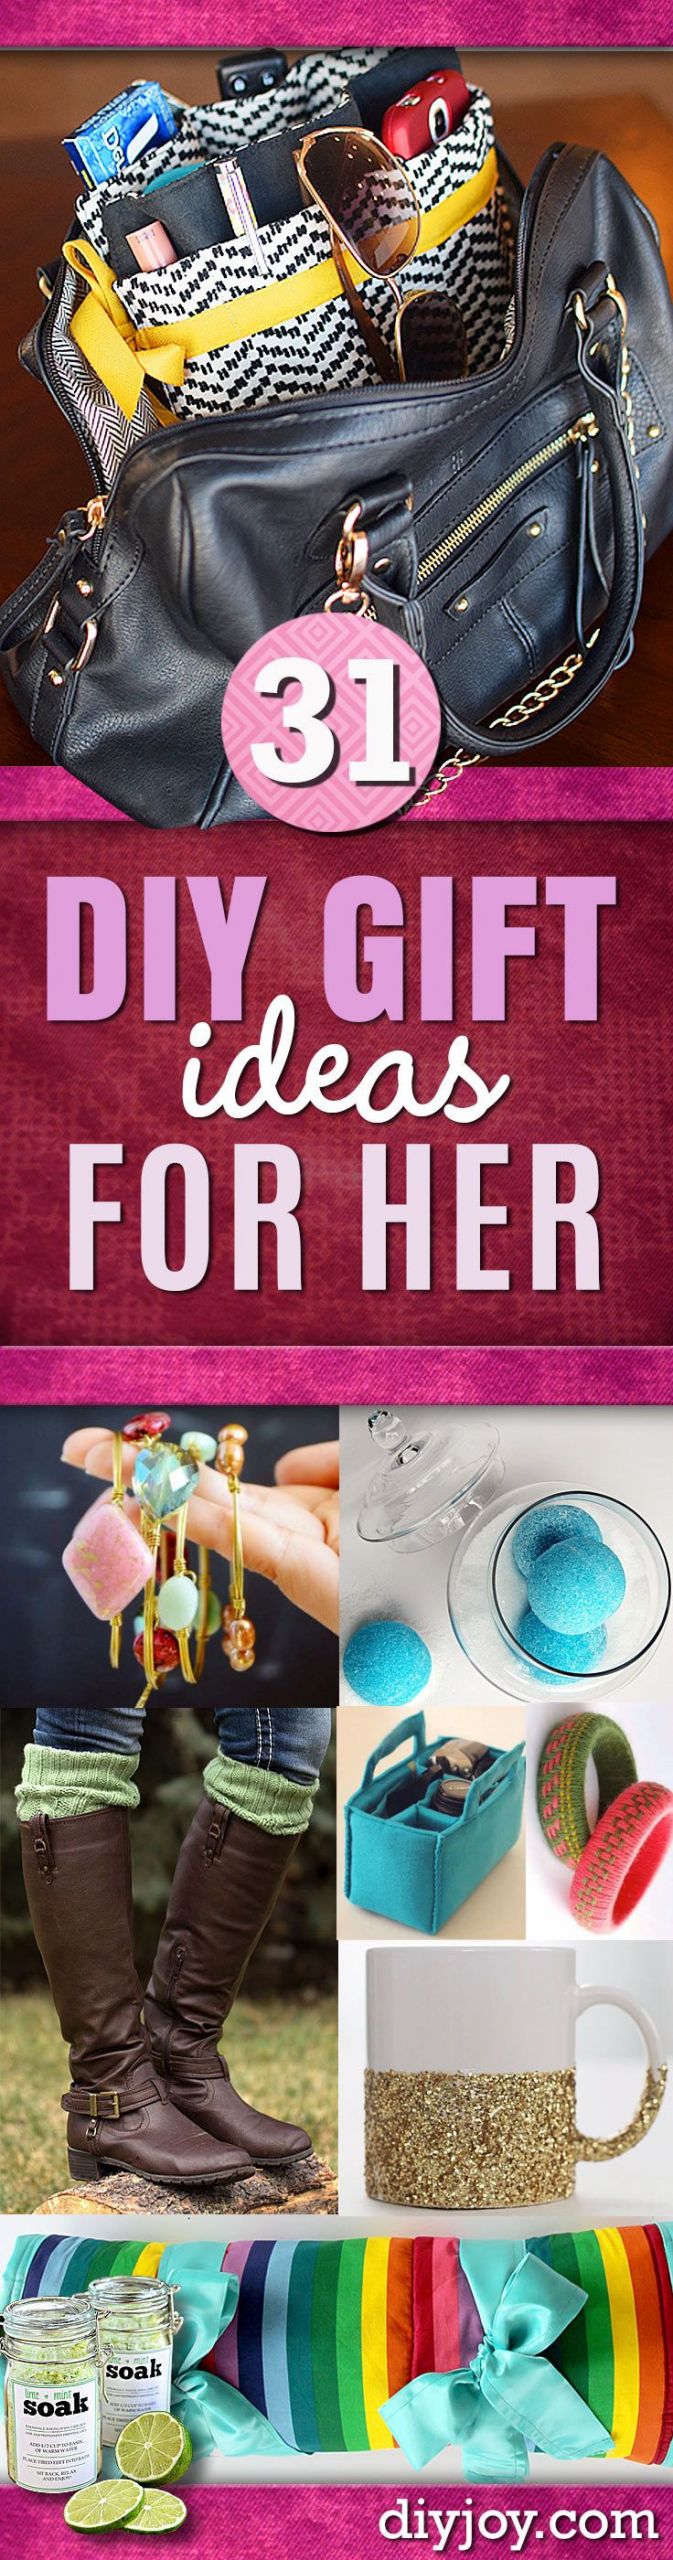 Gift Ideas For Son'S Girlfriend
 Super Special DIY Gift Ideas for Her DIY JOY